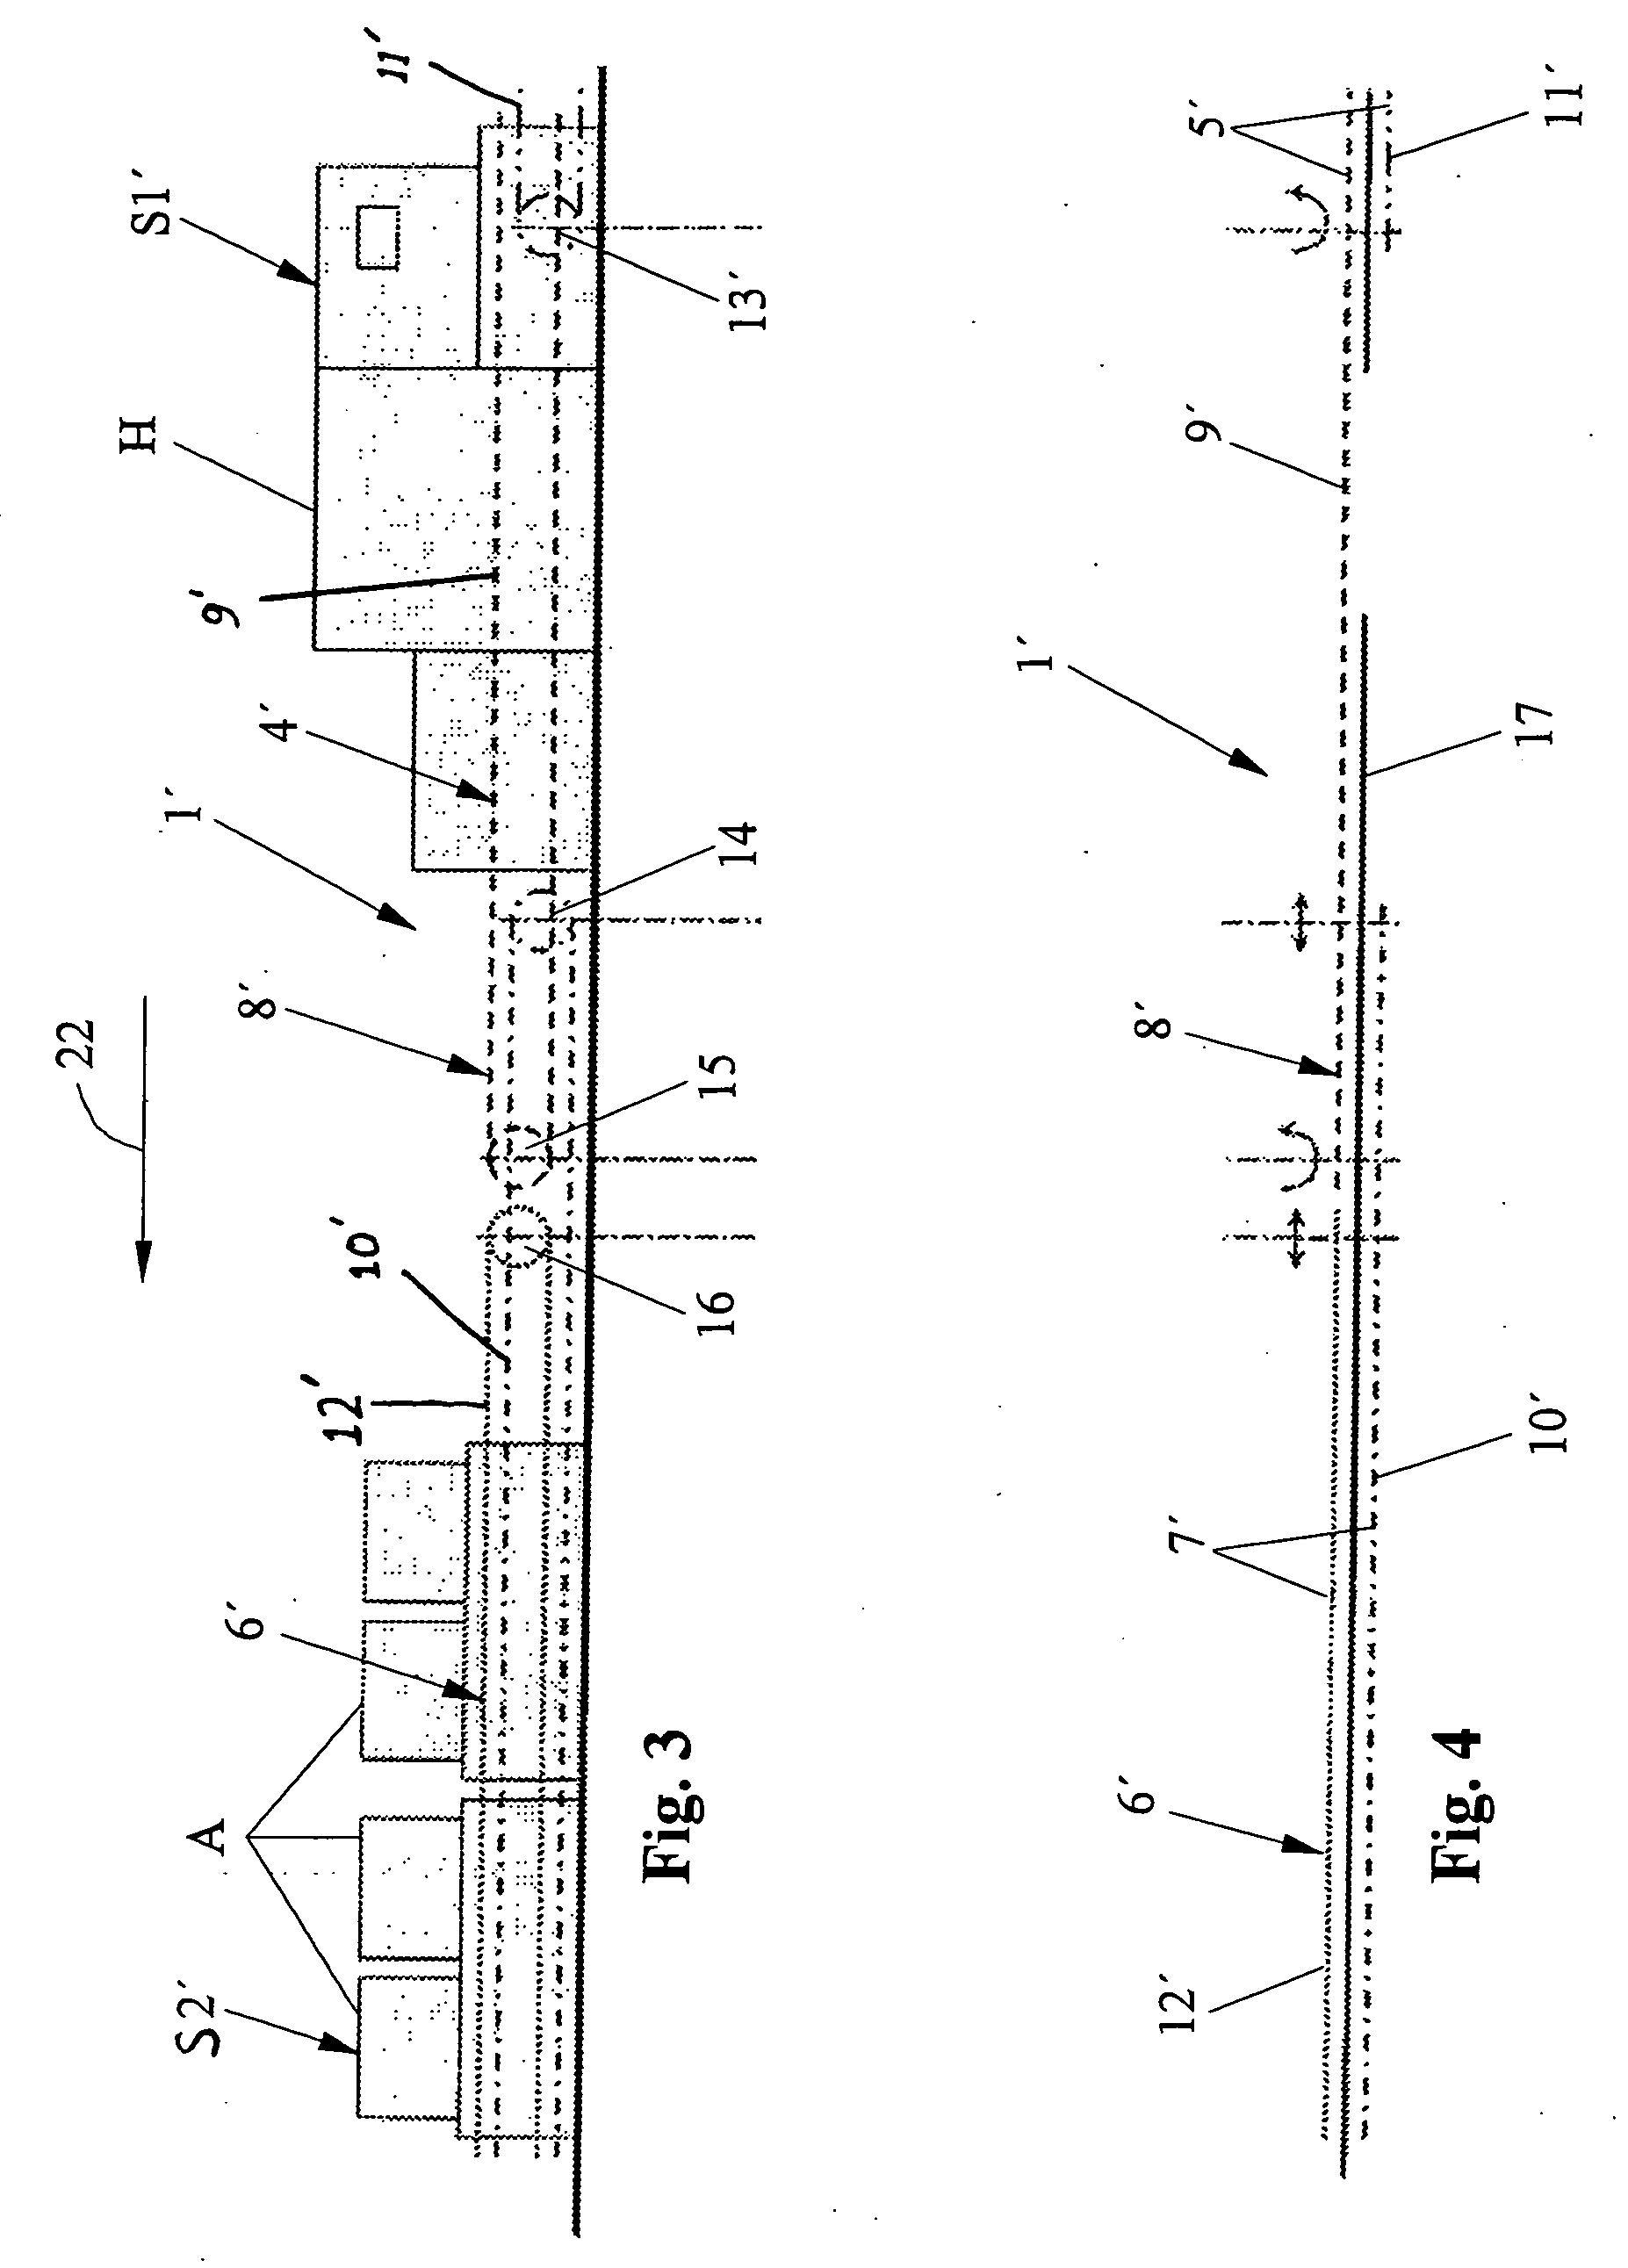 Arrangement for gathering and transporting print products deposited straddling on a conveying device